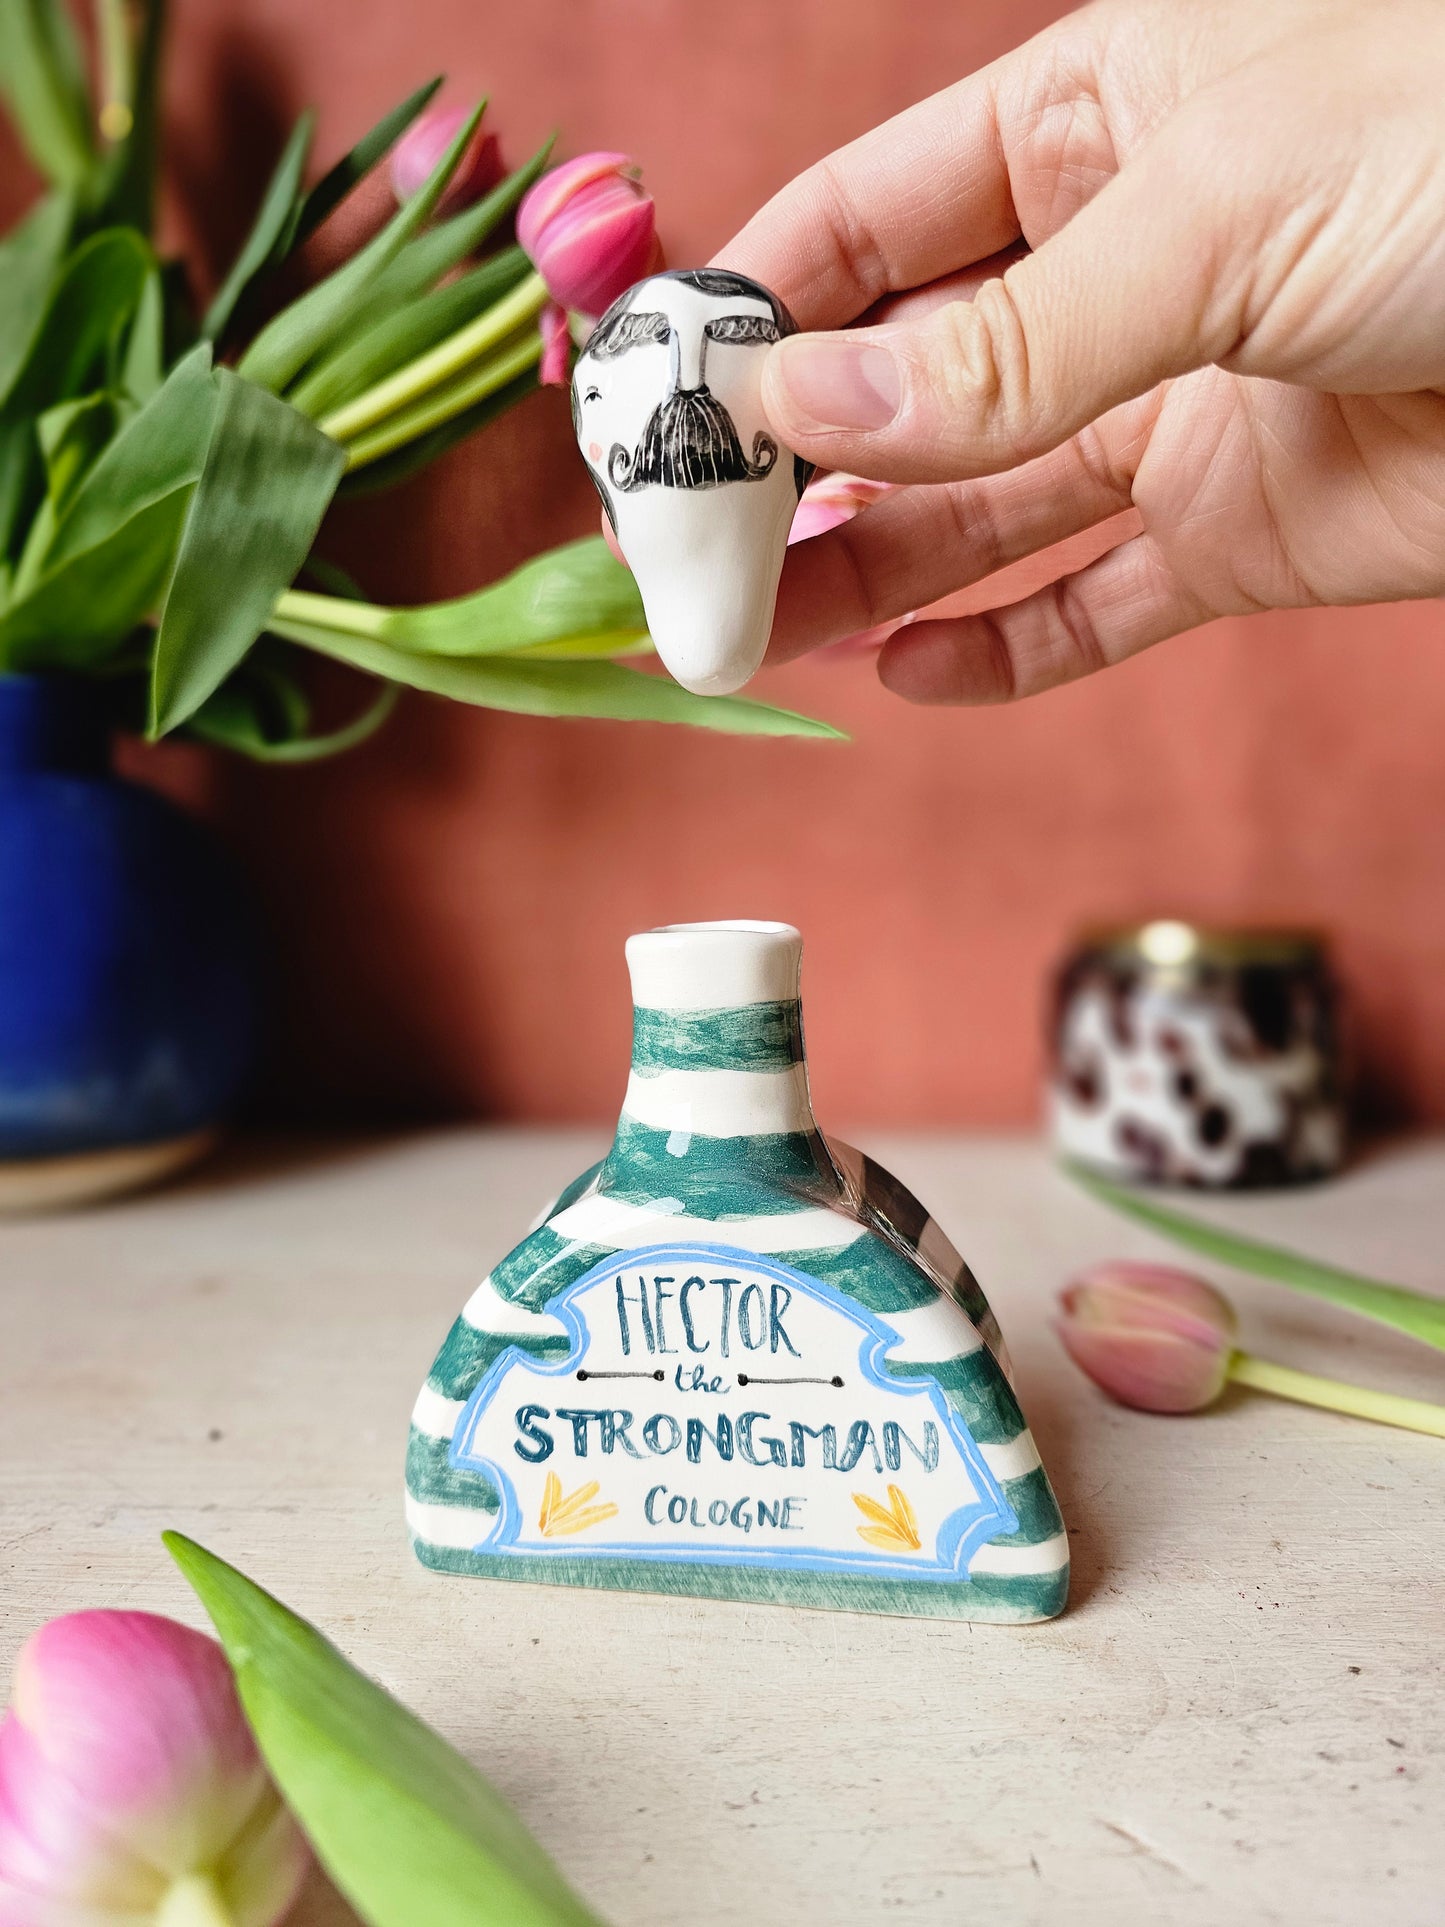 Hector the Strongman cologne Bottle